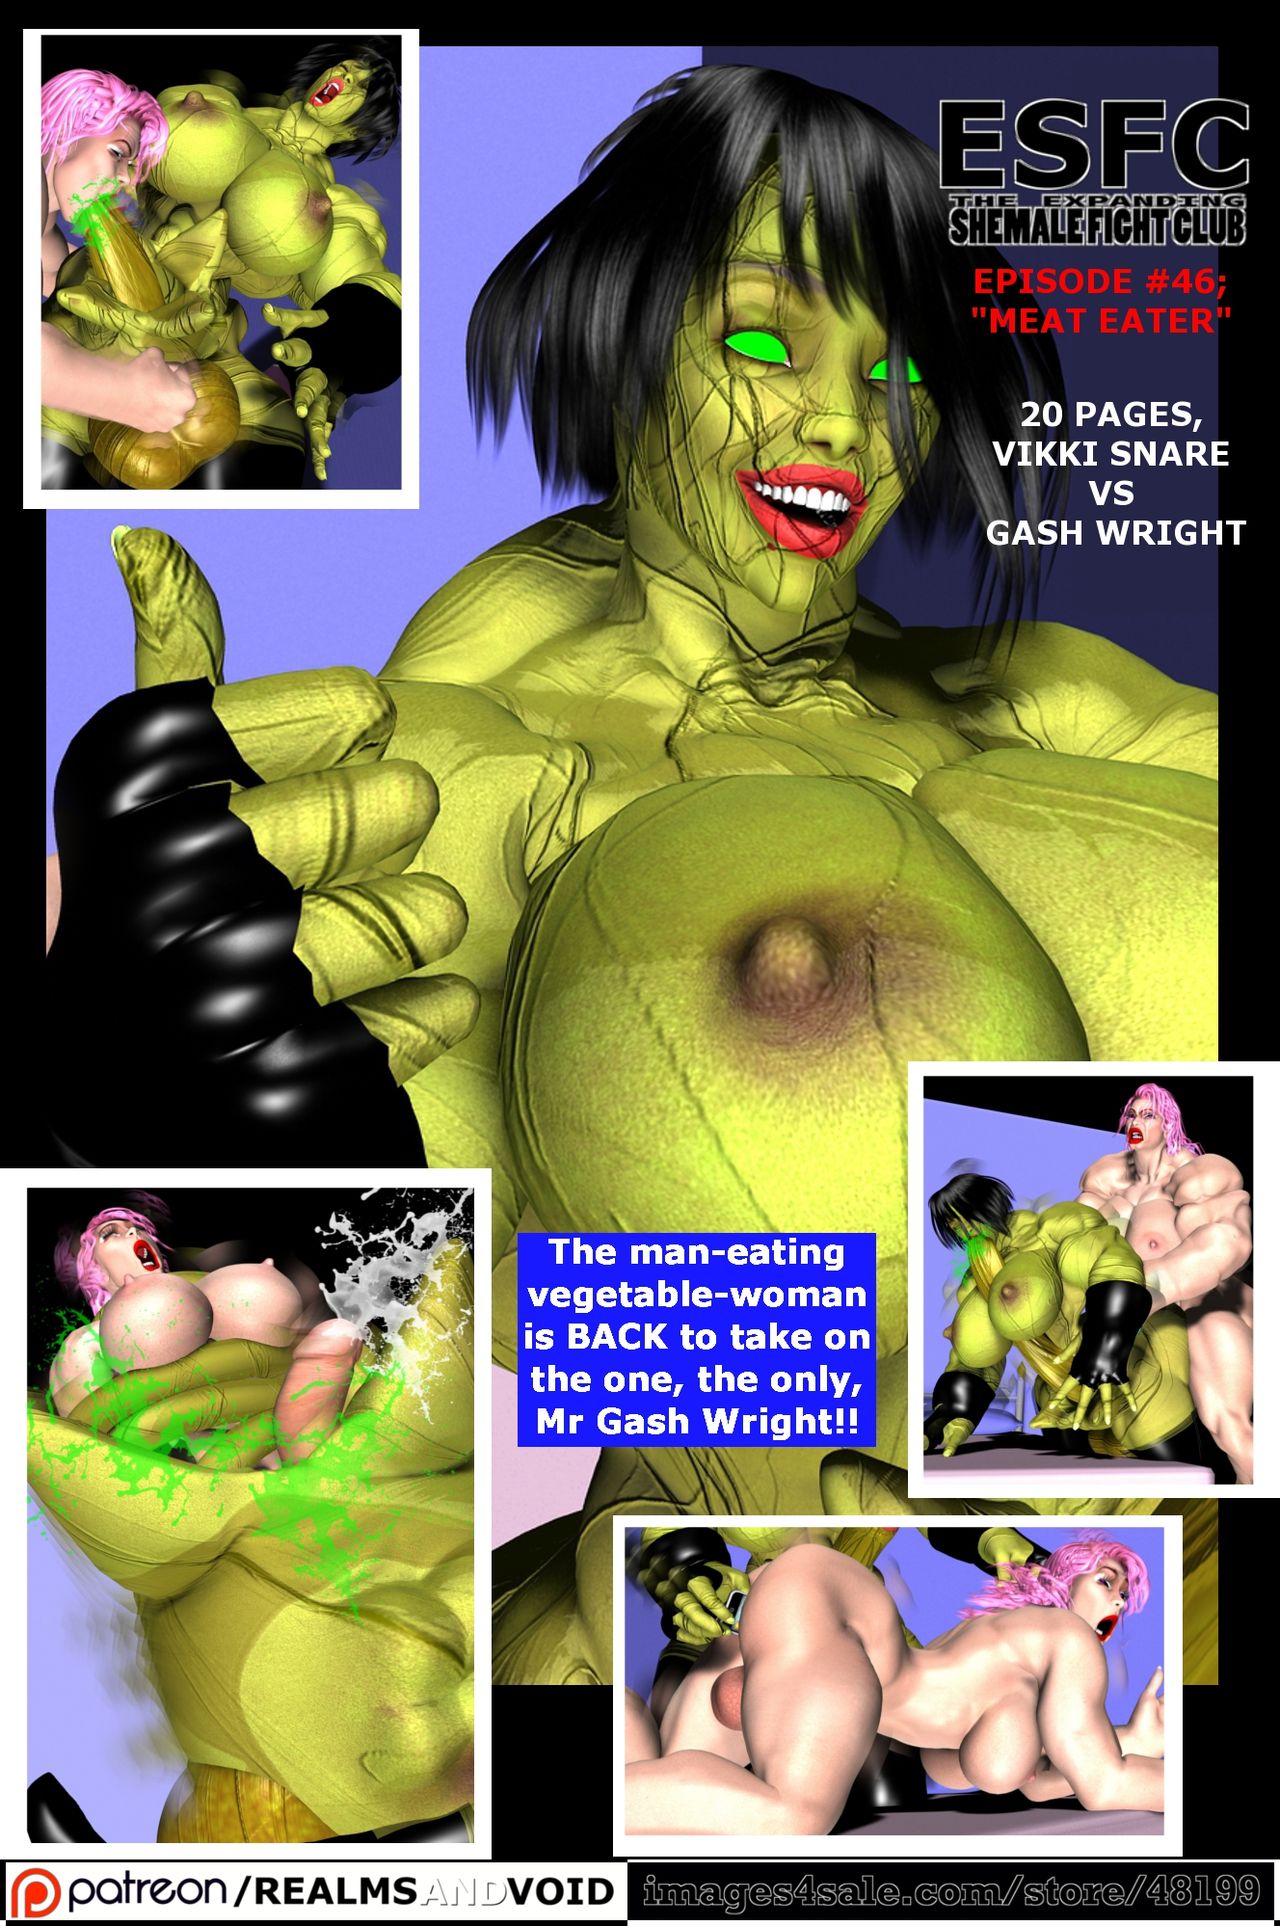 Shemale Fight - Meat Eater- Expanding Shemale Fight Club 46, Hardcore Sex â€¢ Free Porn Comics